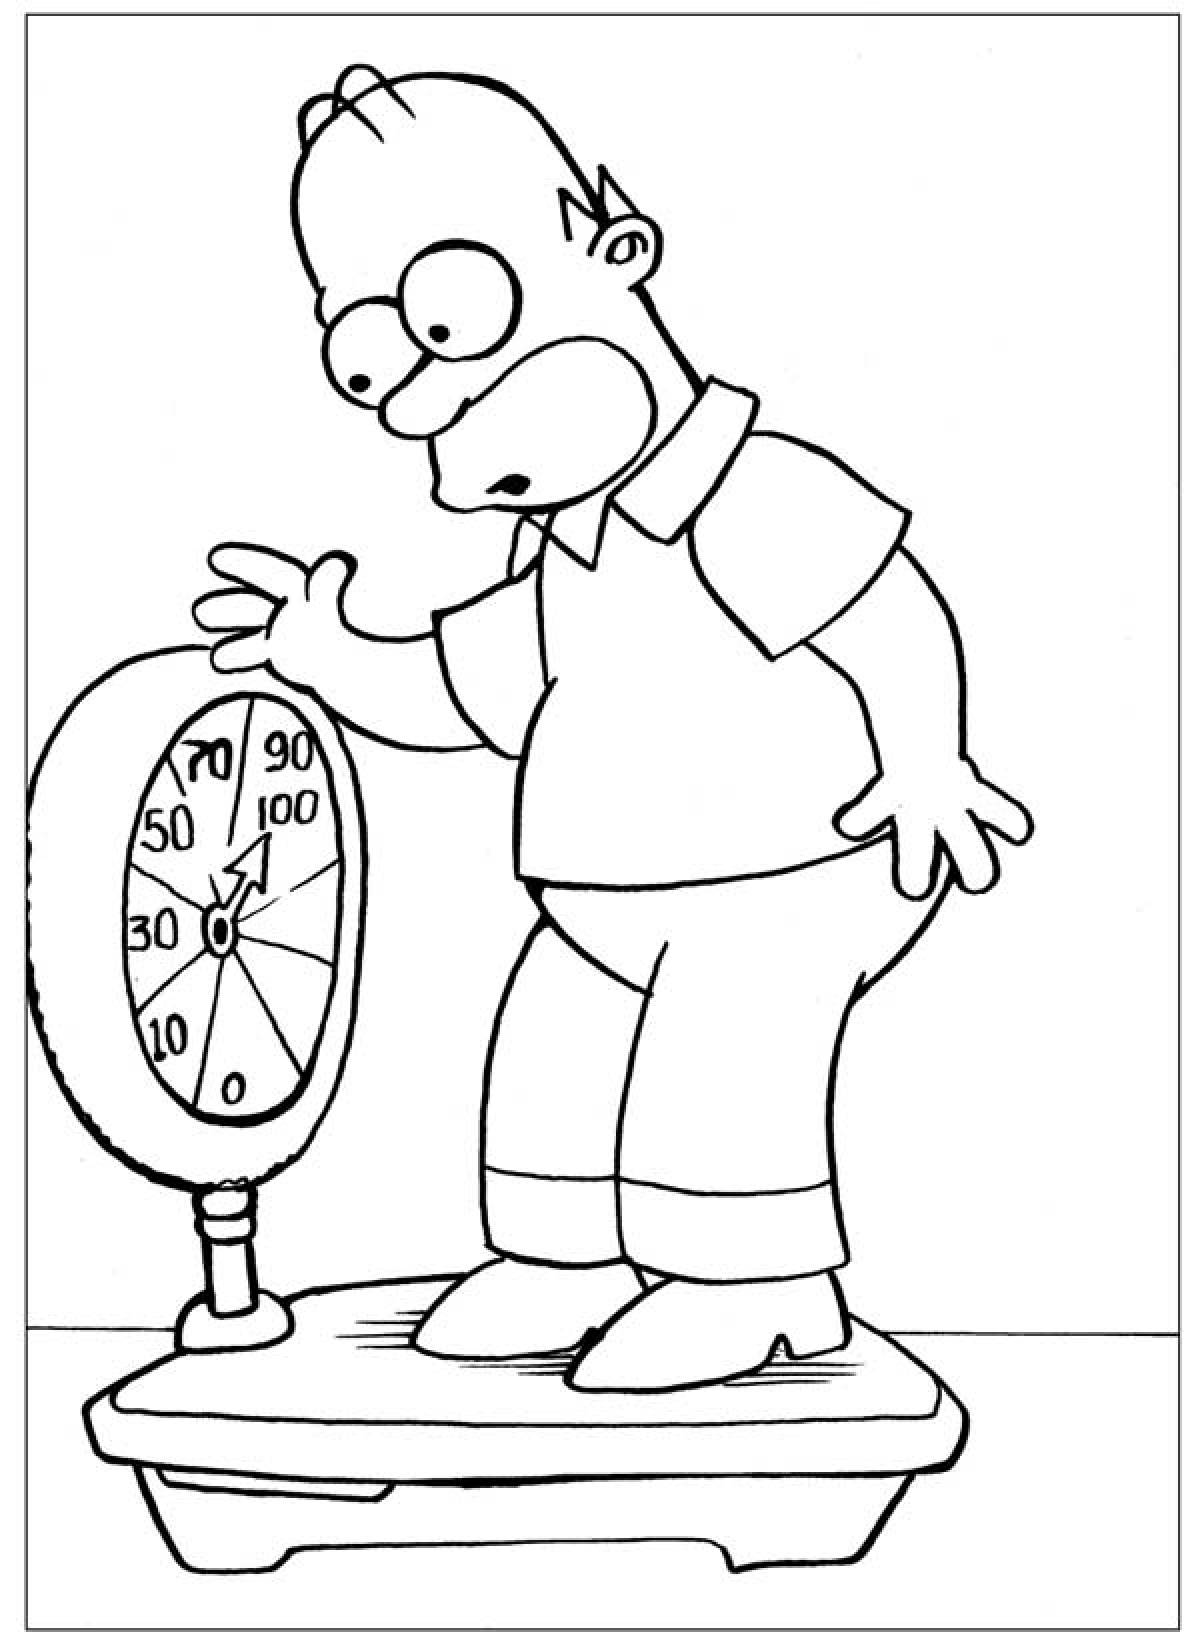 Homer on the scales